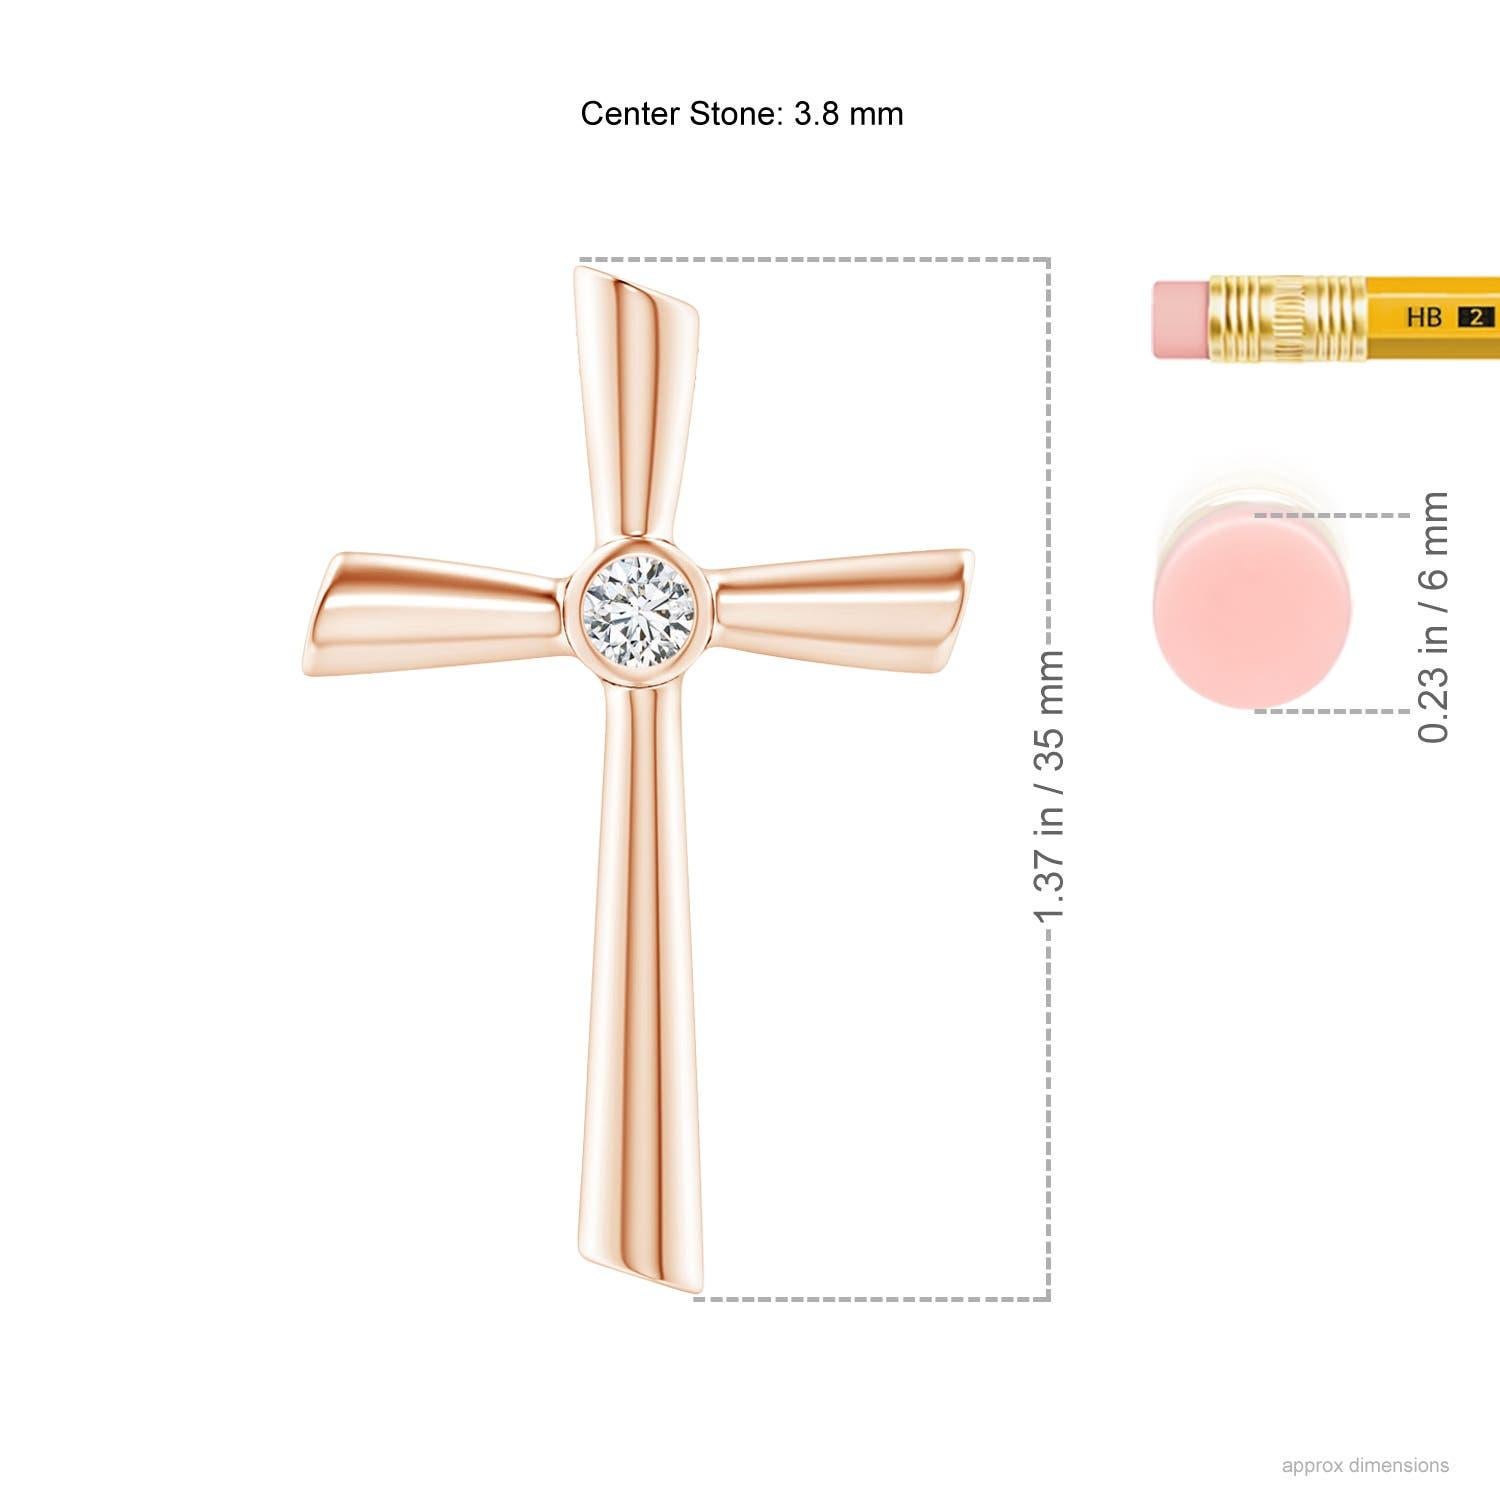 Designed in 14k rose gold, this diamond crucifix pendant features a twinkling solitaire diamond at the core. The grooves exude a reflective allure that complements the brilliance of the round diamond.
Diamond is the Birthstone for April and